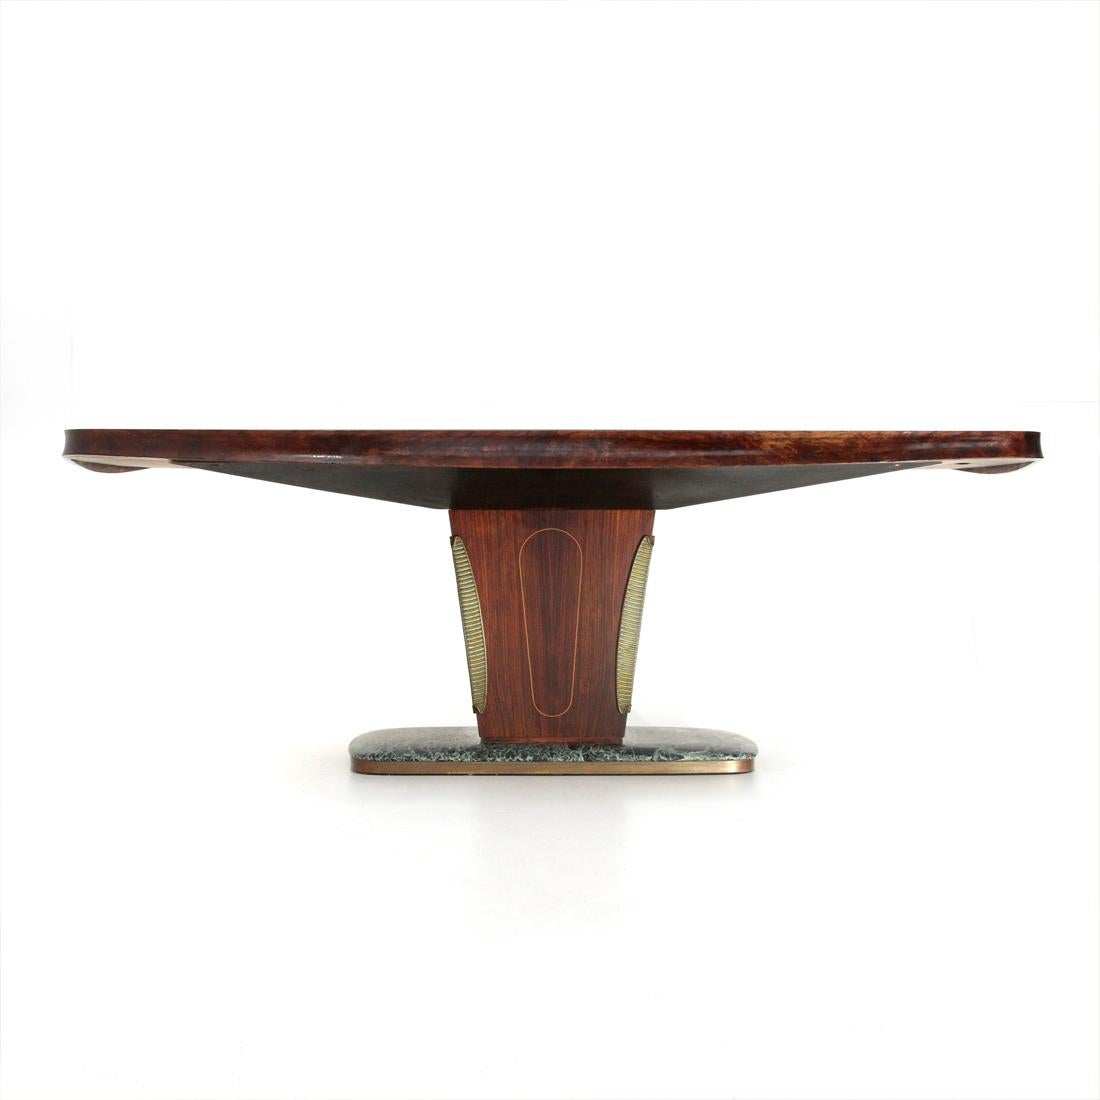 Dining table produced in the 1950s and designed by Vittorio Dassi.
Marble base with brass edge.
Central leg in veneered wood with edges covered in shaped and gilded wood.
Wooden top with curved wooden frame and green glass surface.
Good general